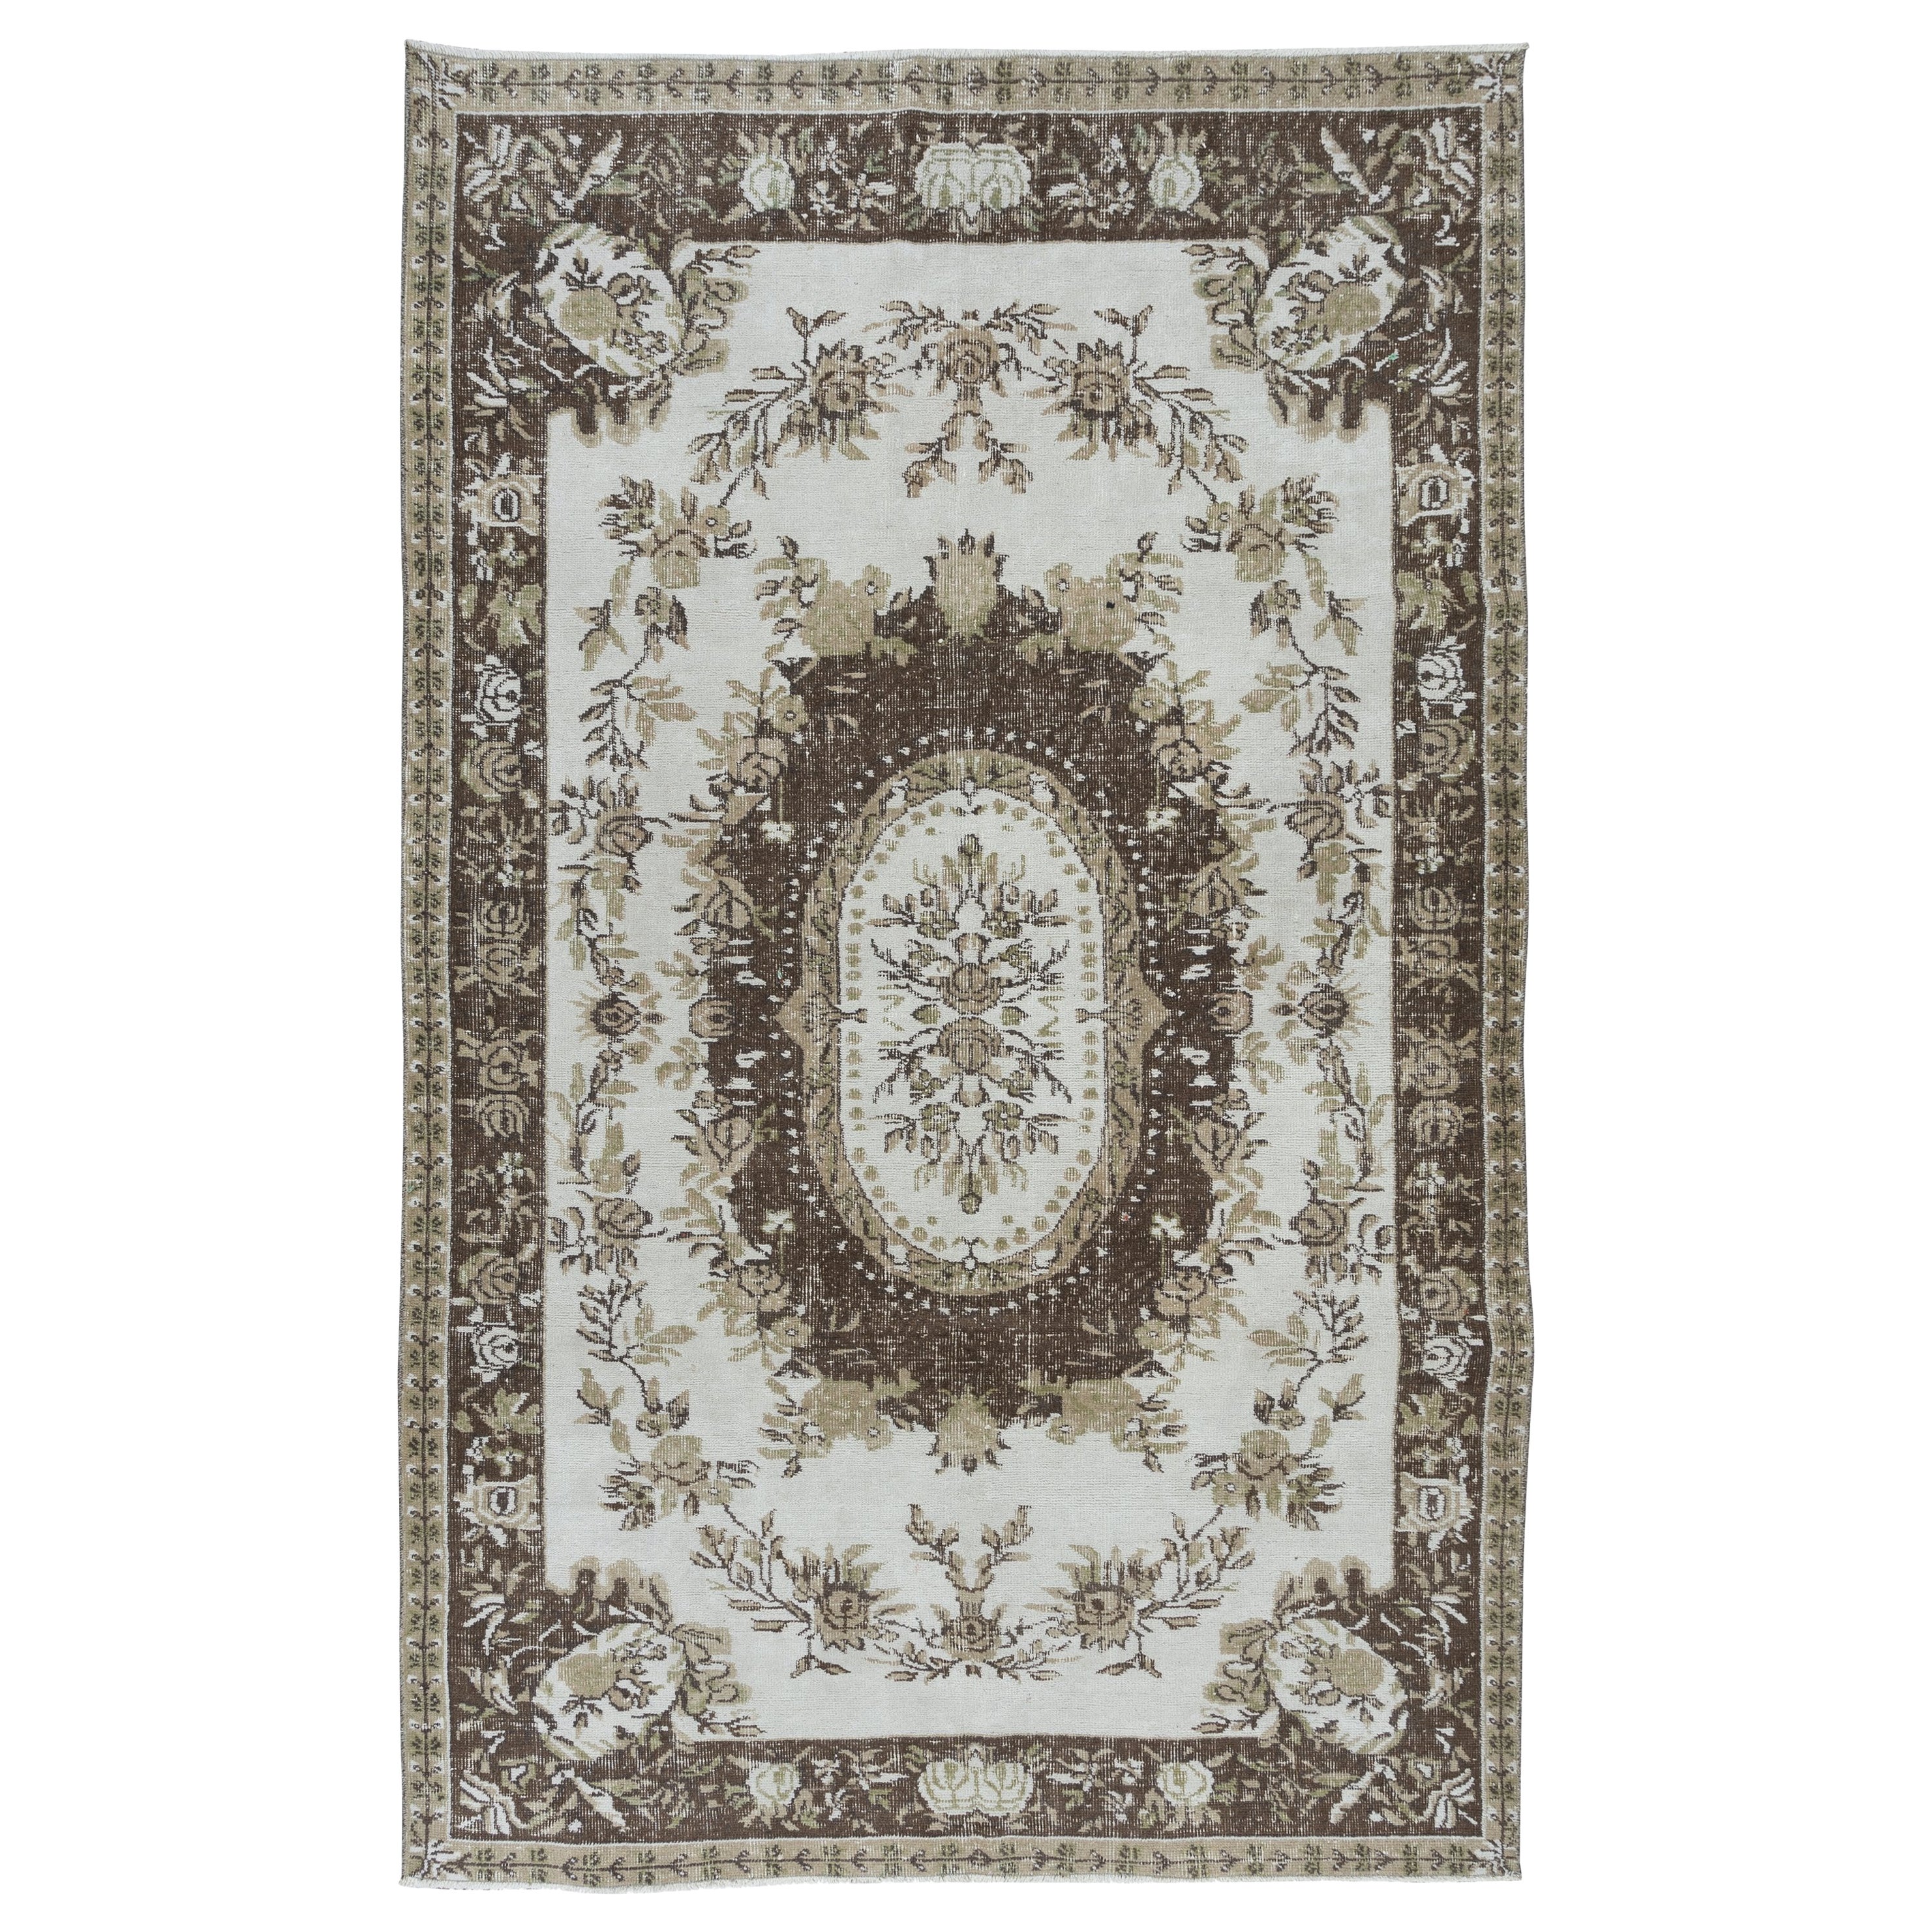 5.4x8.4 Ft Classic Aubusson Inspired Vintage Handmade Faded Teppich in Beige & Brown im Angebot